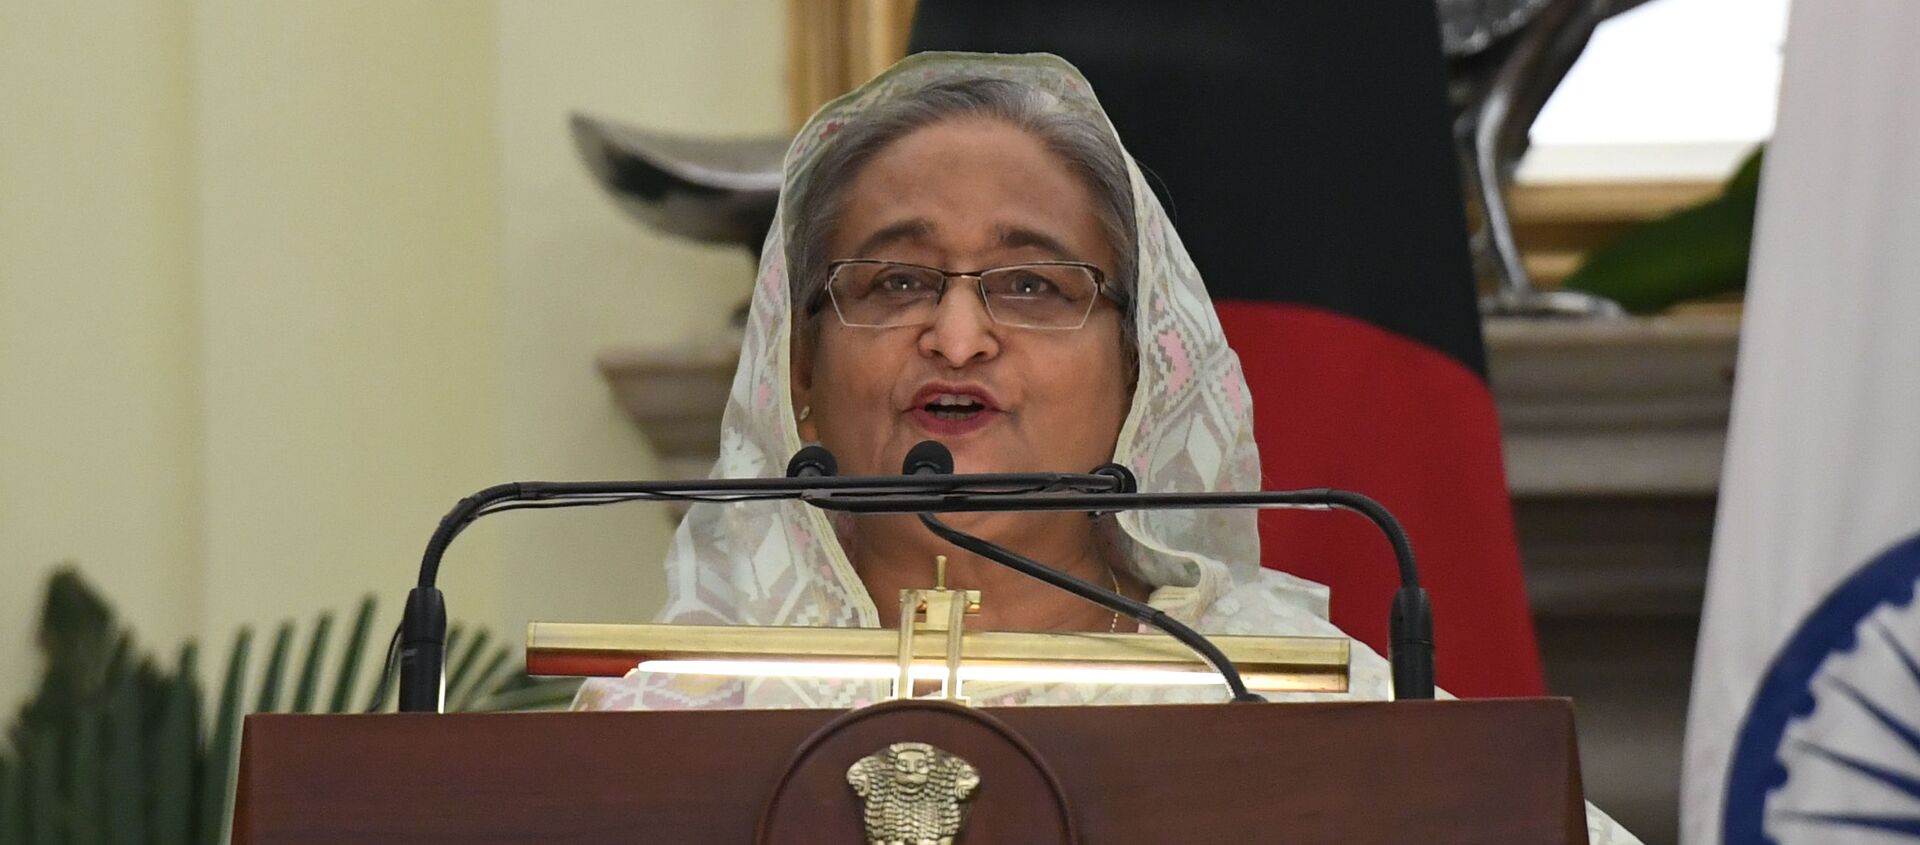 Bangladesh's Prime Minister Sheikh Hasina speaks during a press conference with India's Prime Minister Narendra Modi after a meeting in New Delhi on October 5, 2019. - Sputnik International, 1920, 16.12.2020